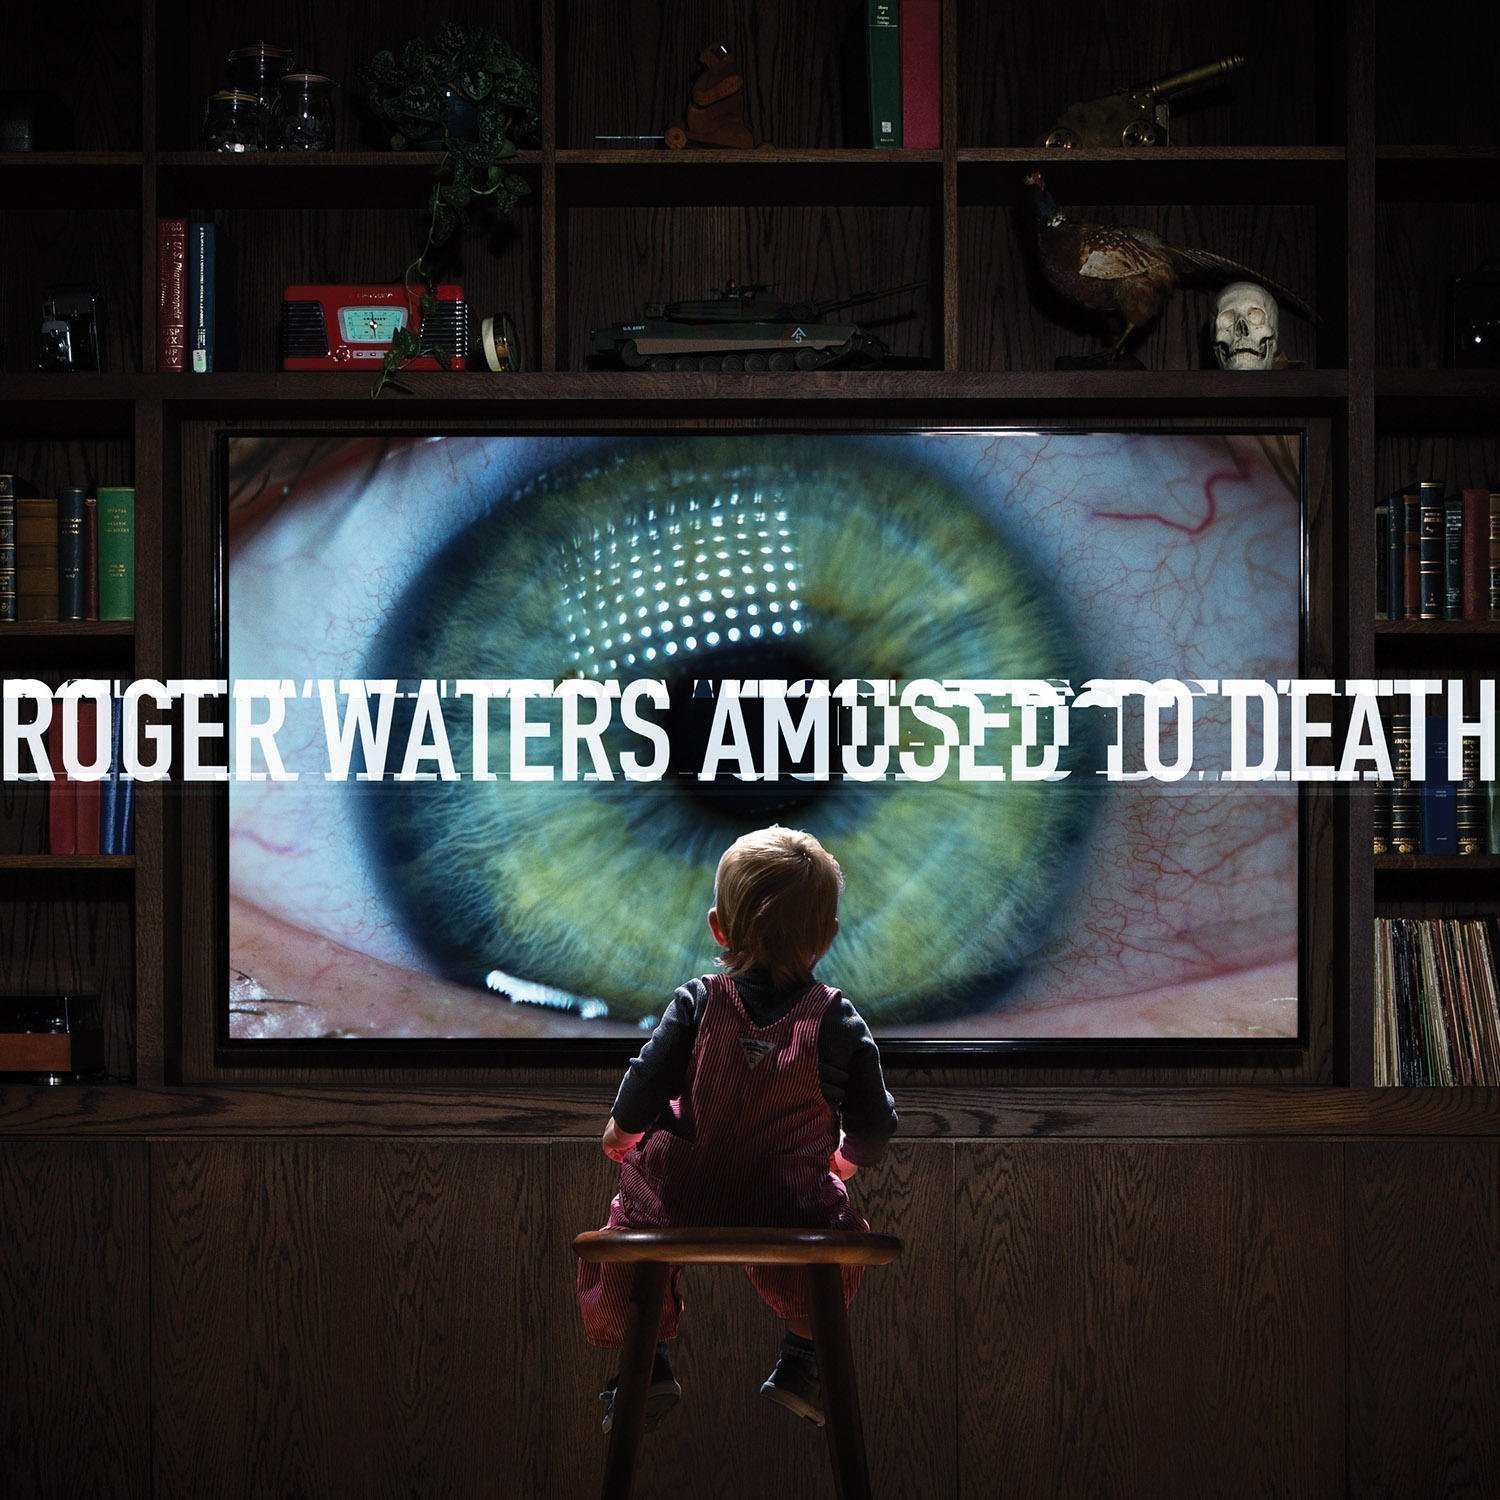 Disque vinyle Roger Waters Amused To Death (Gatefold Sleeve) (2 LP)